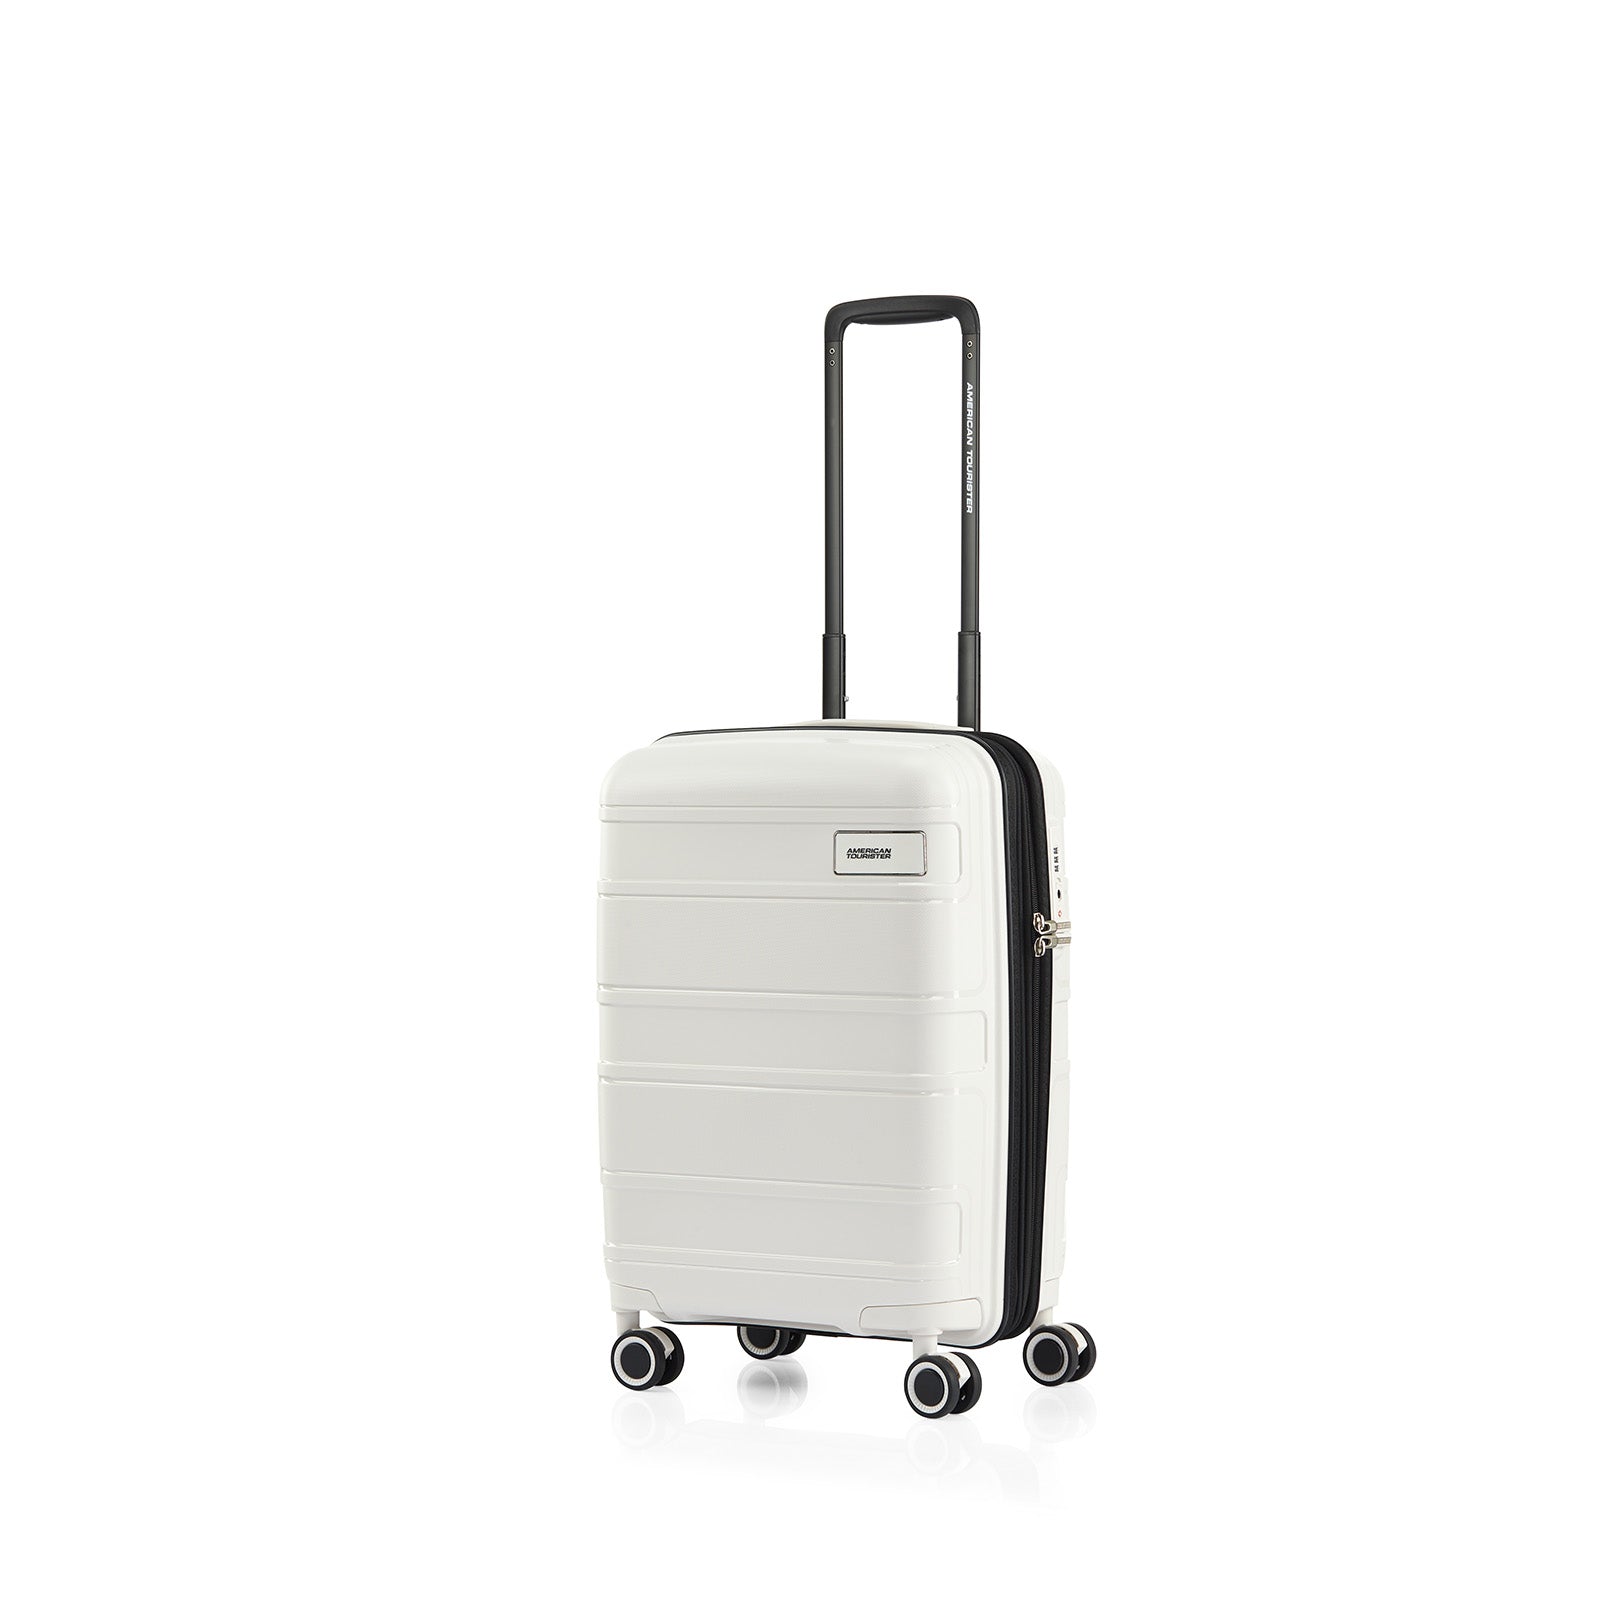 American-Tourister-Light-Max-55cm-Carry-On-Suitcase-Off-White-Front-Angle